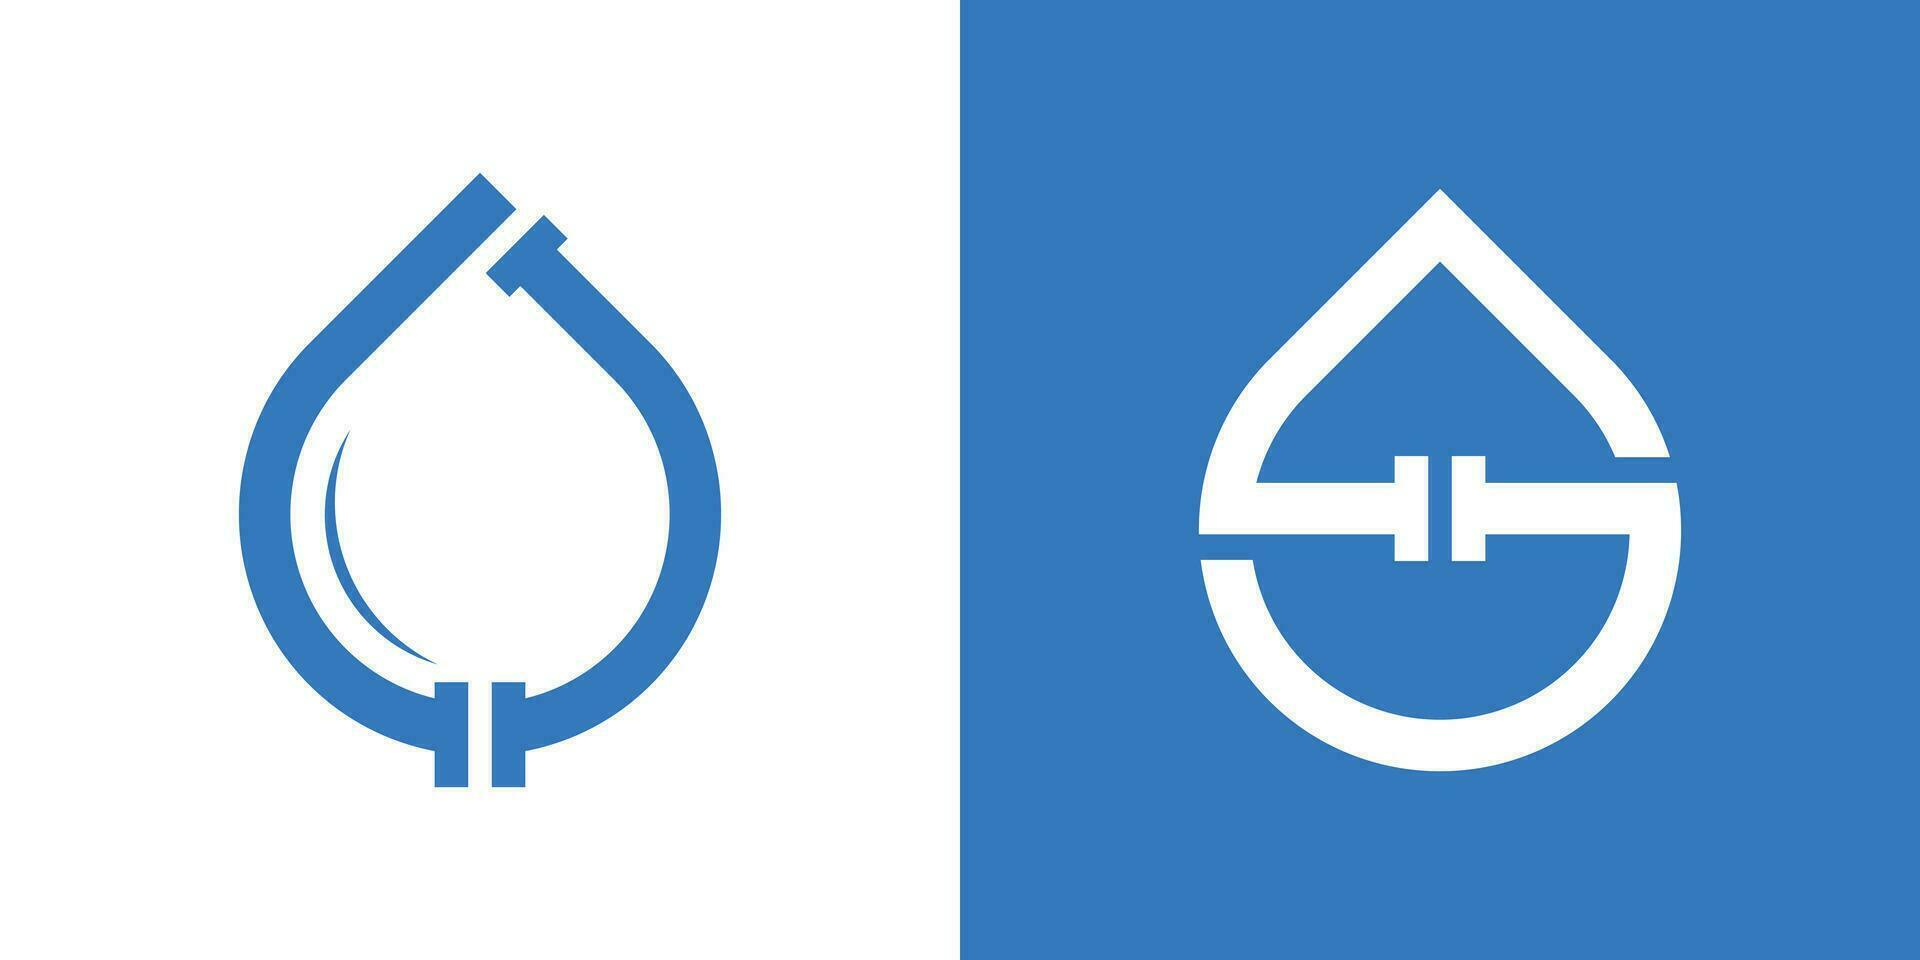 plumbing and water logo icon vector illustration